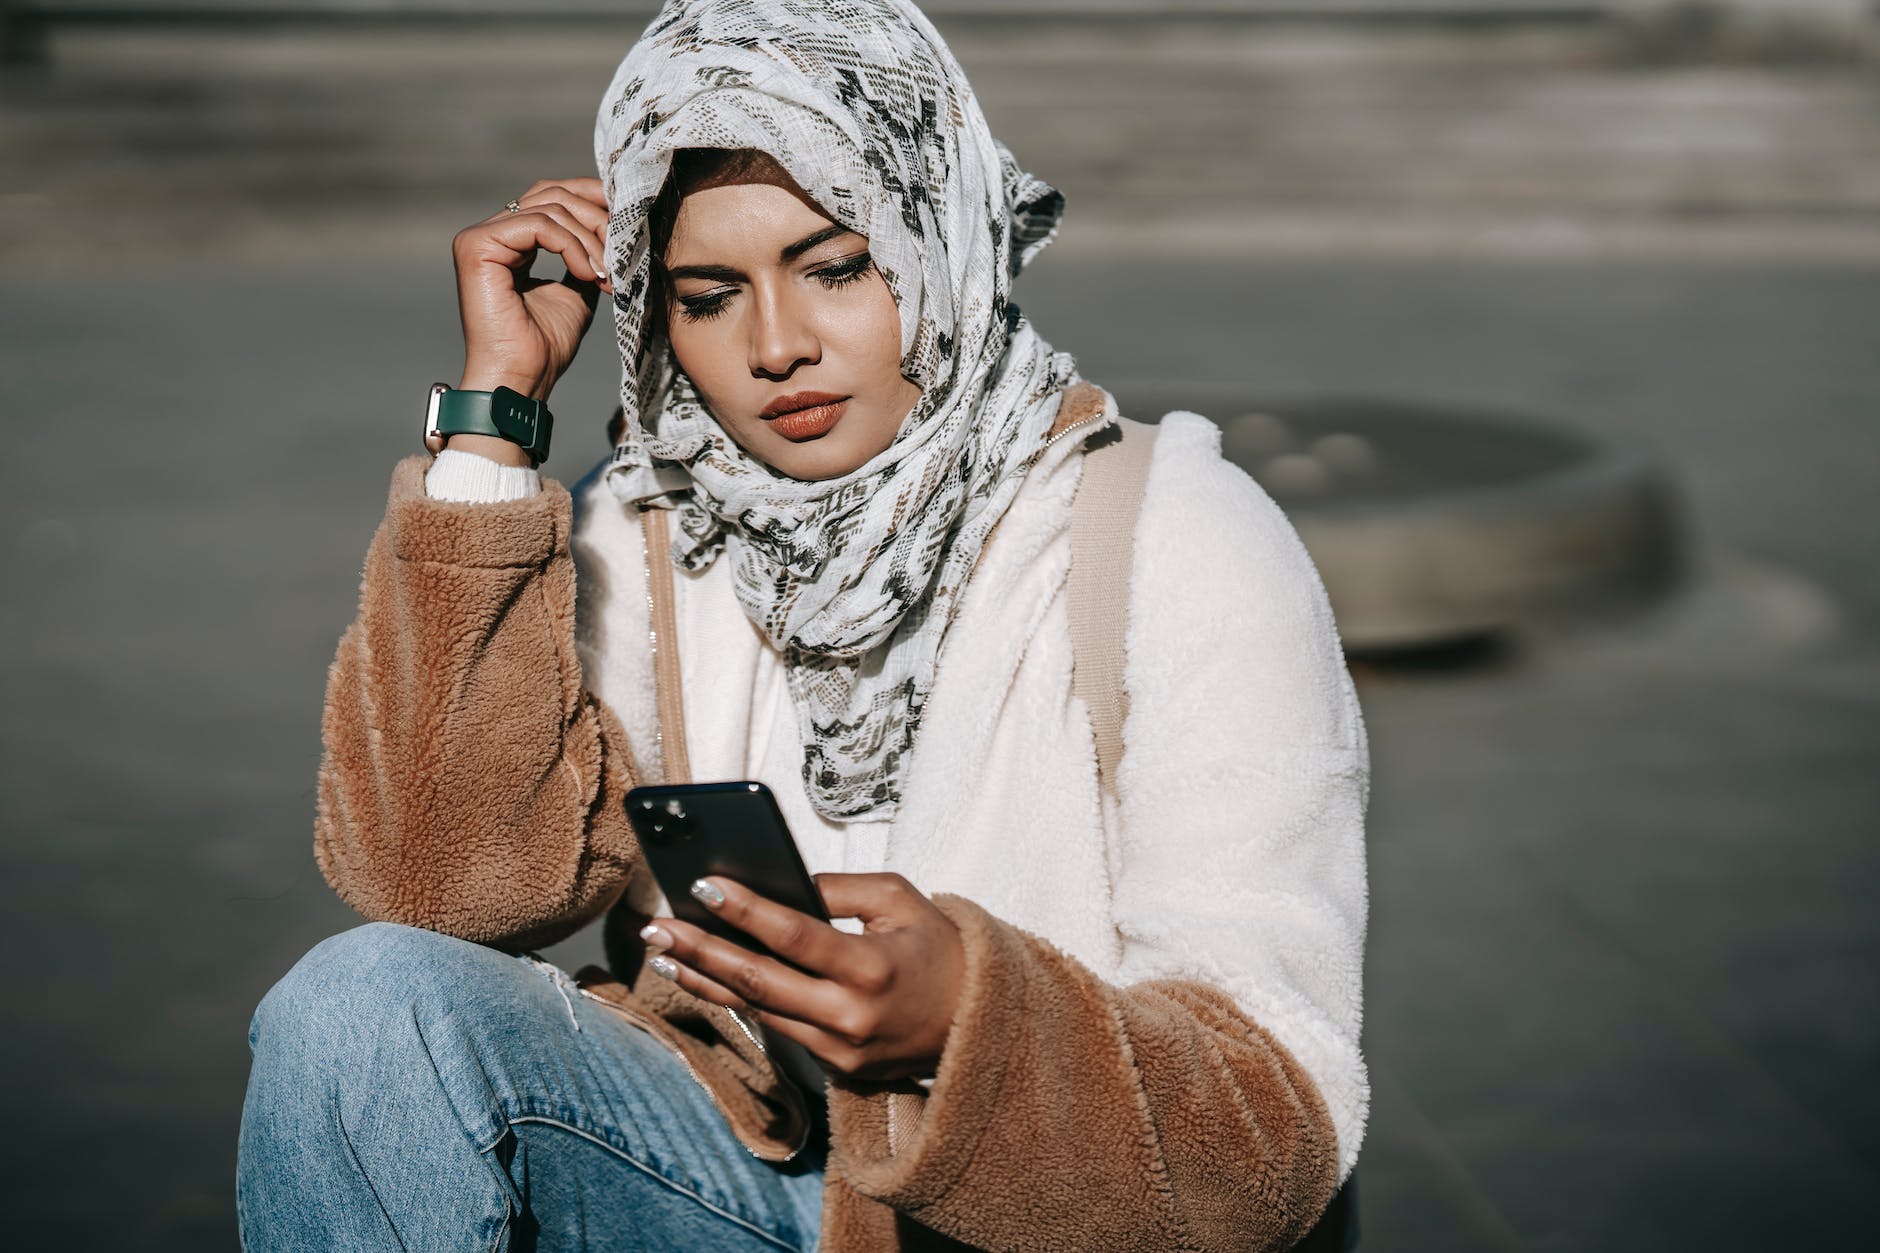 stylish young ethnic lady in hijab using mobile phone on street